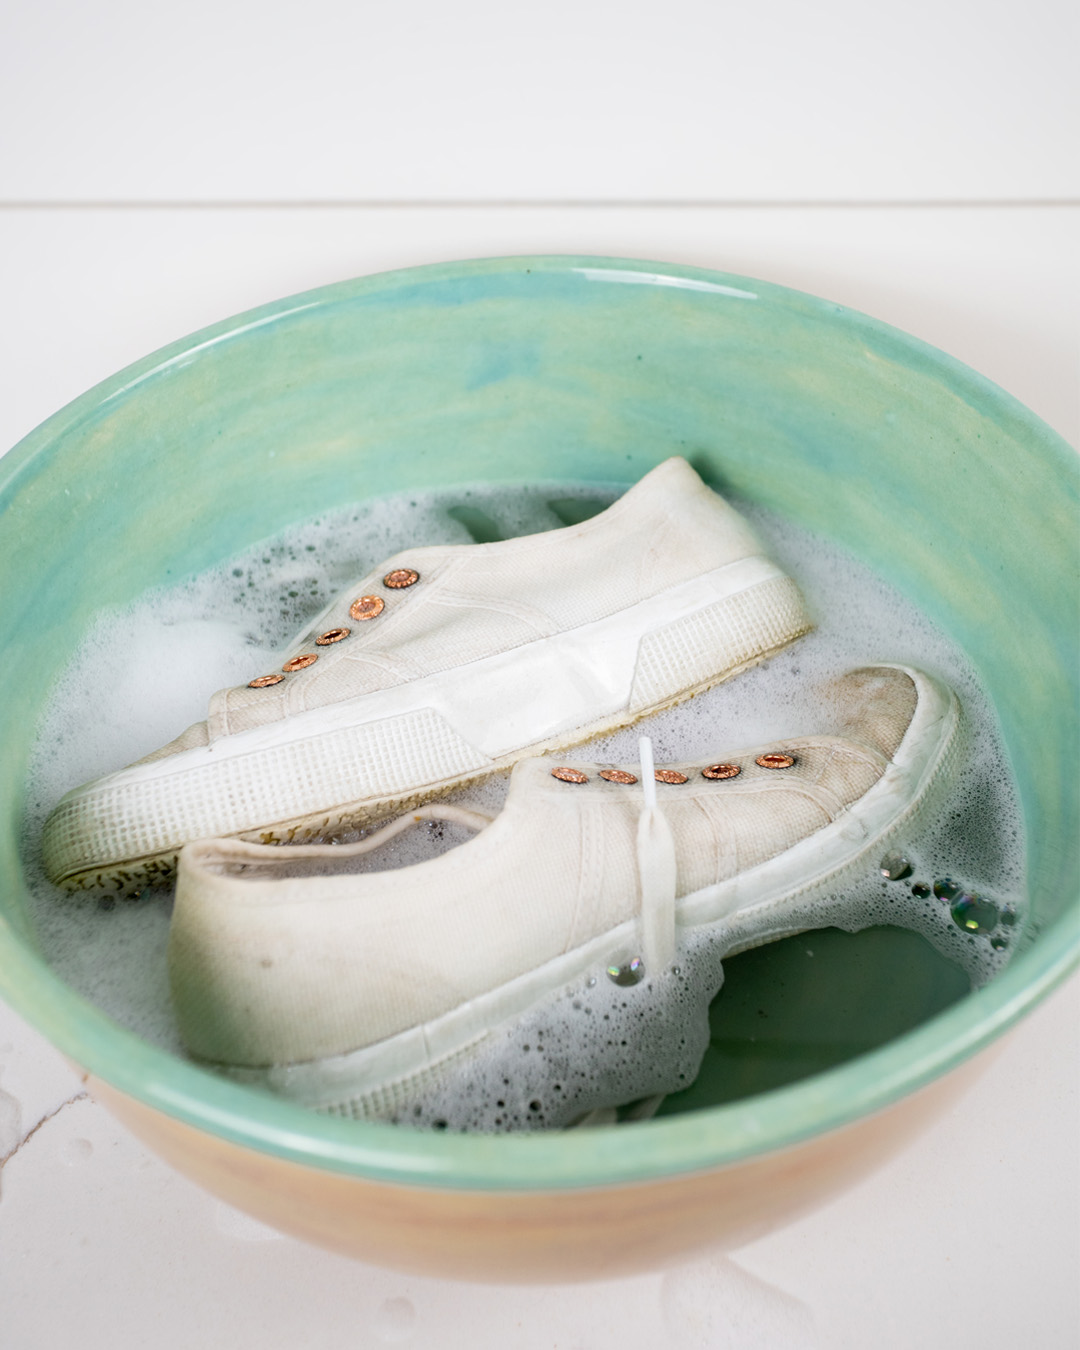 In today's post we'll talk about the most effective way to clean white canvas sneakers and get them back to almost as good as new!